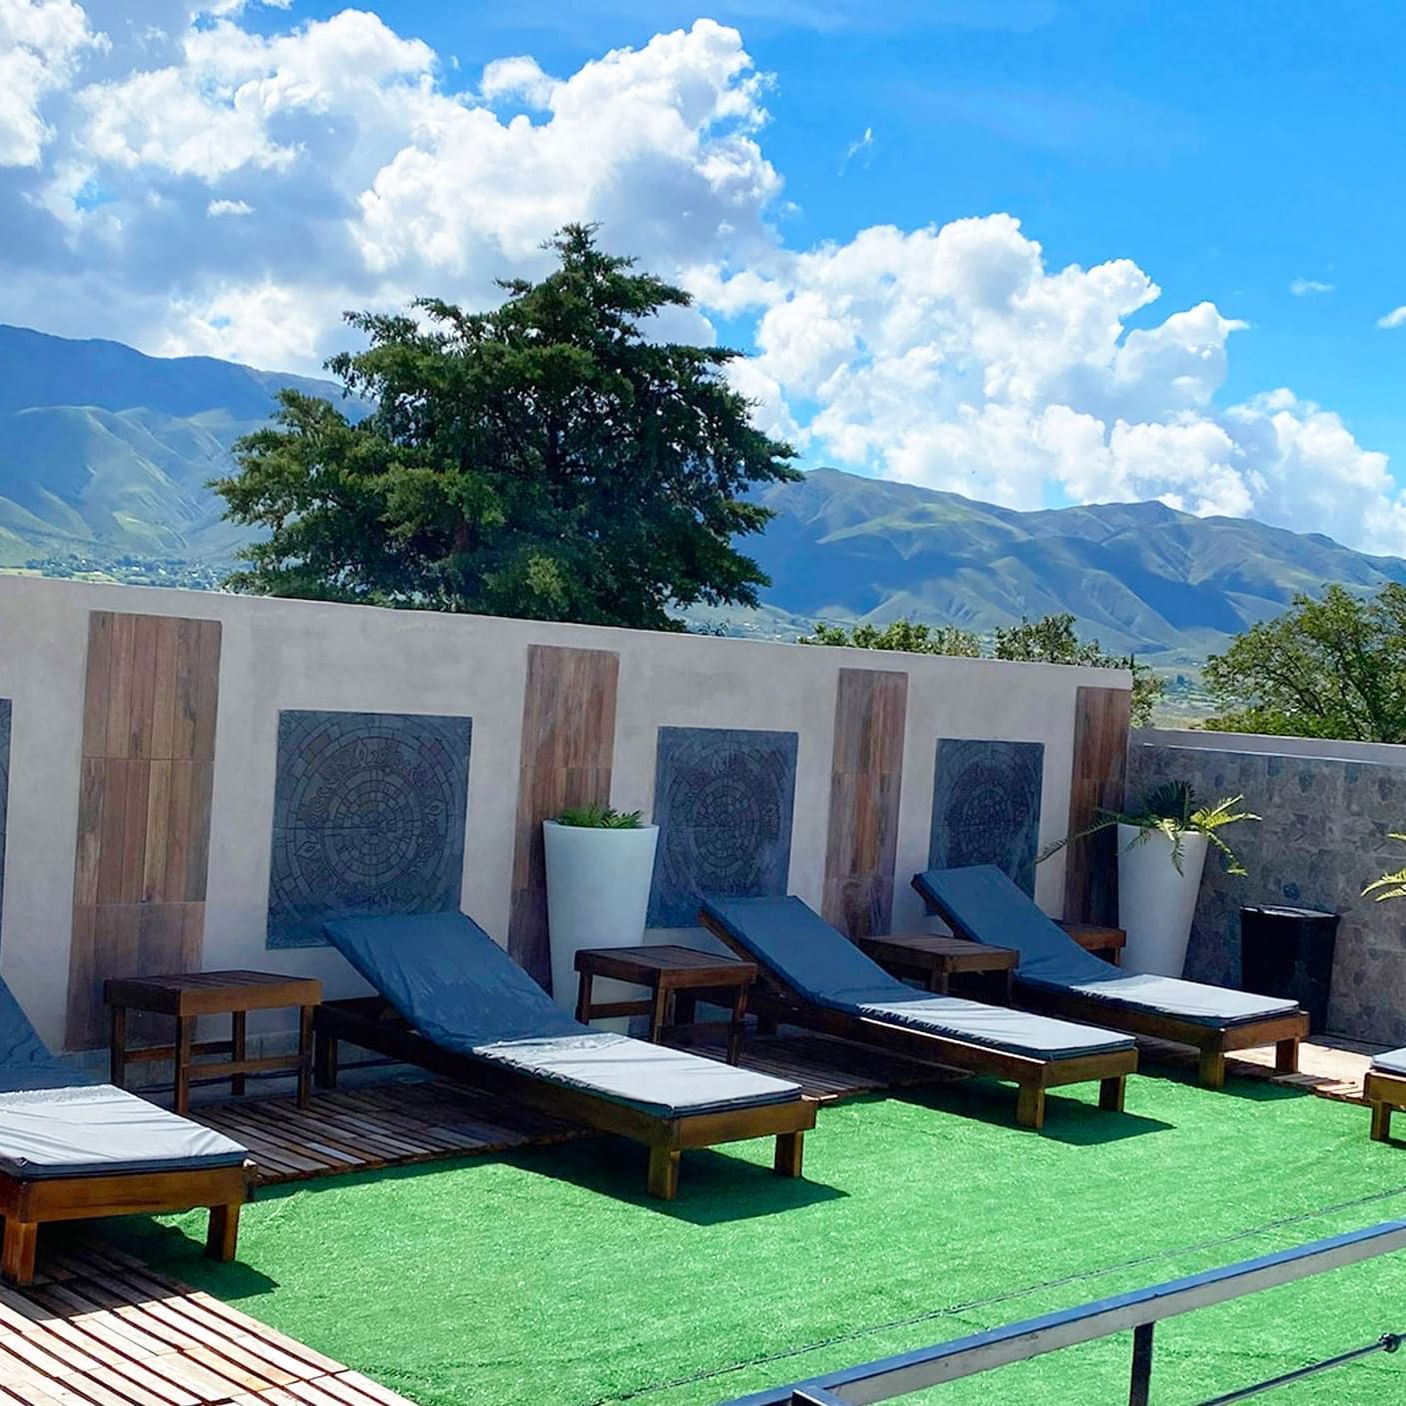 Lounge beds in the rooftop at Hotel Colonial Tafi del Valle